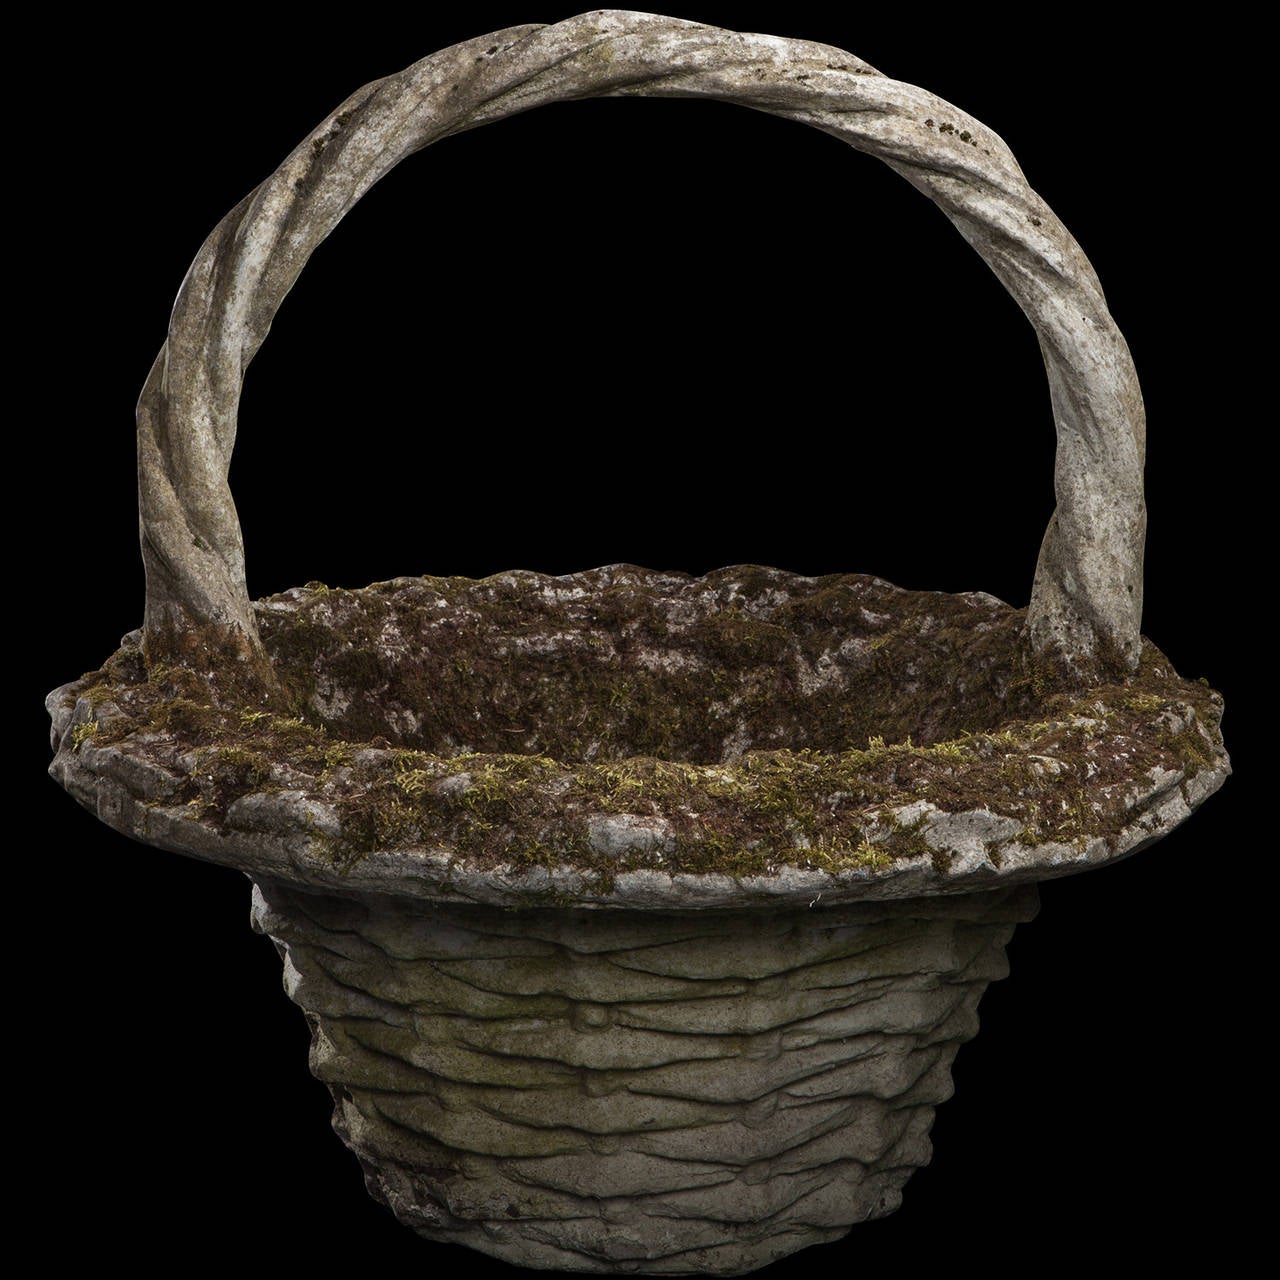 Cast basket with beautiful patina and lichen.